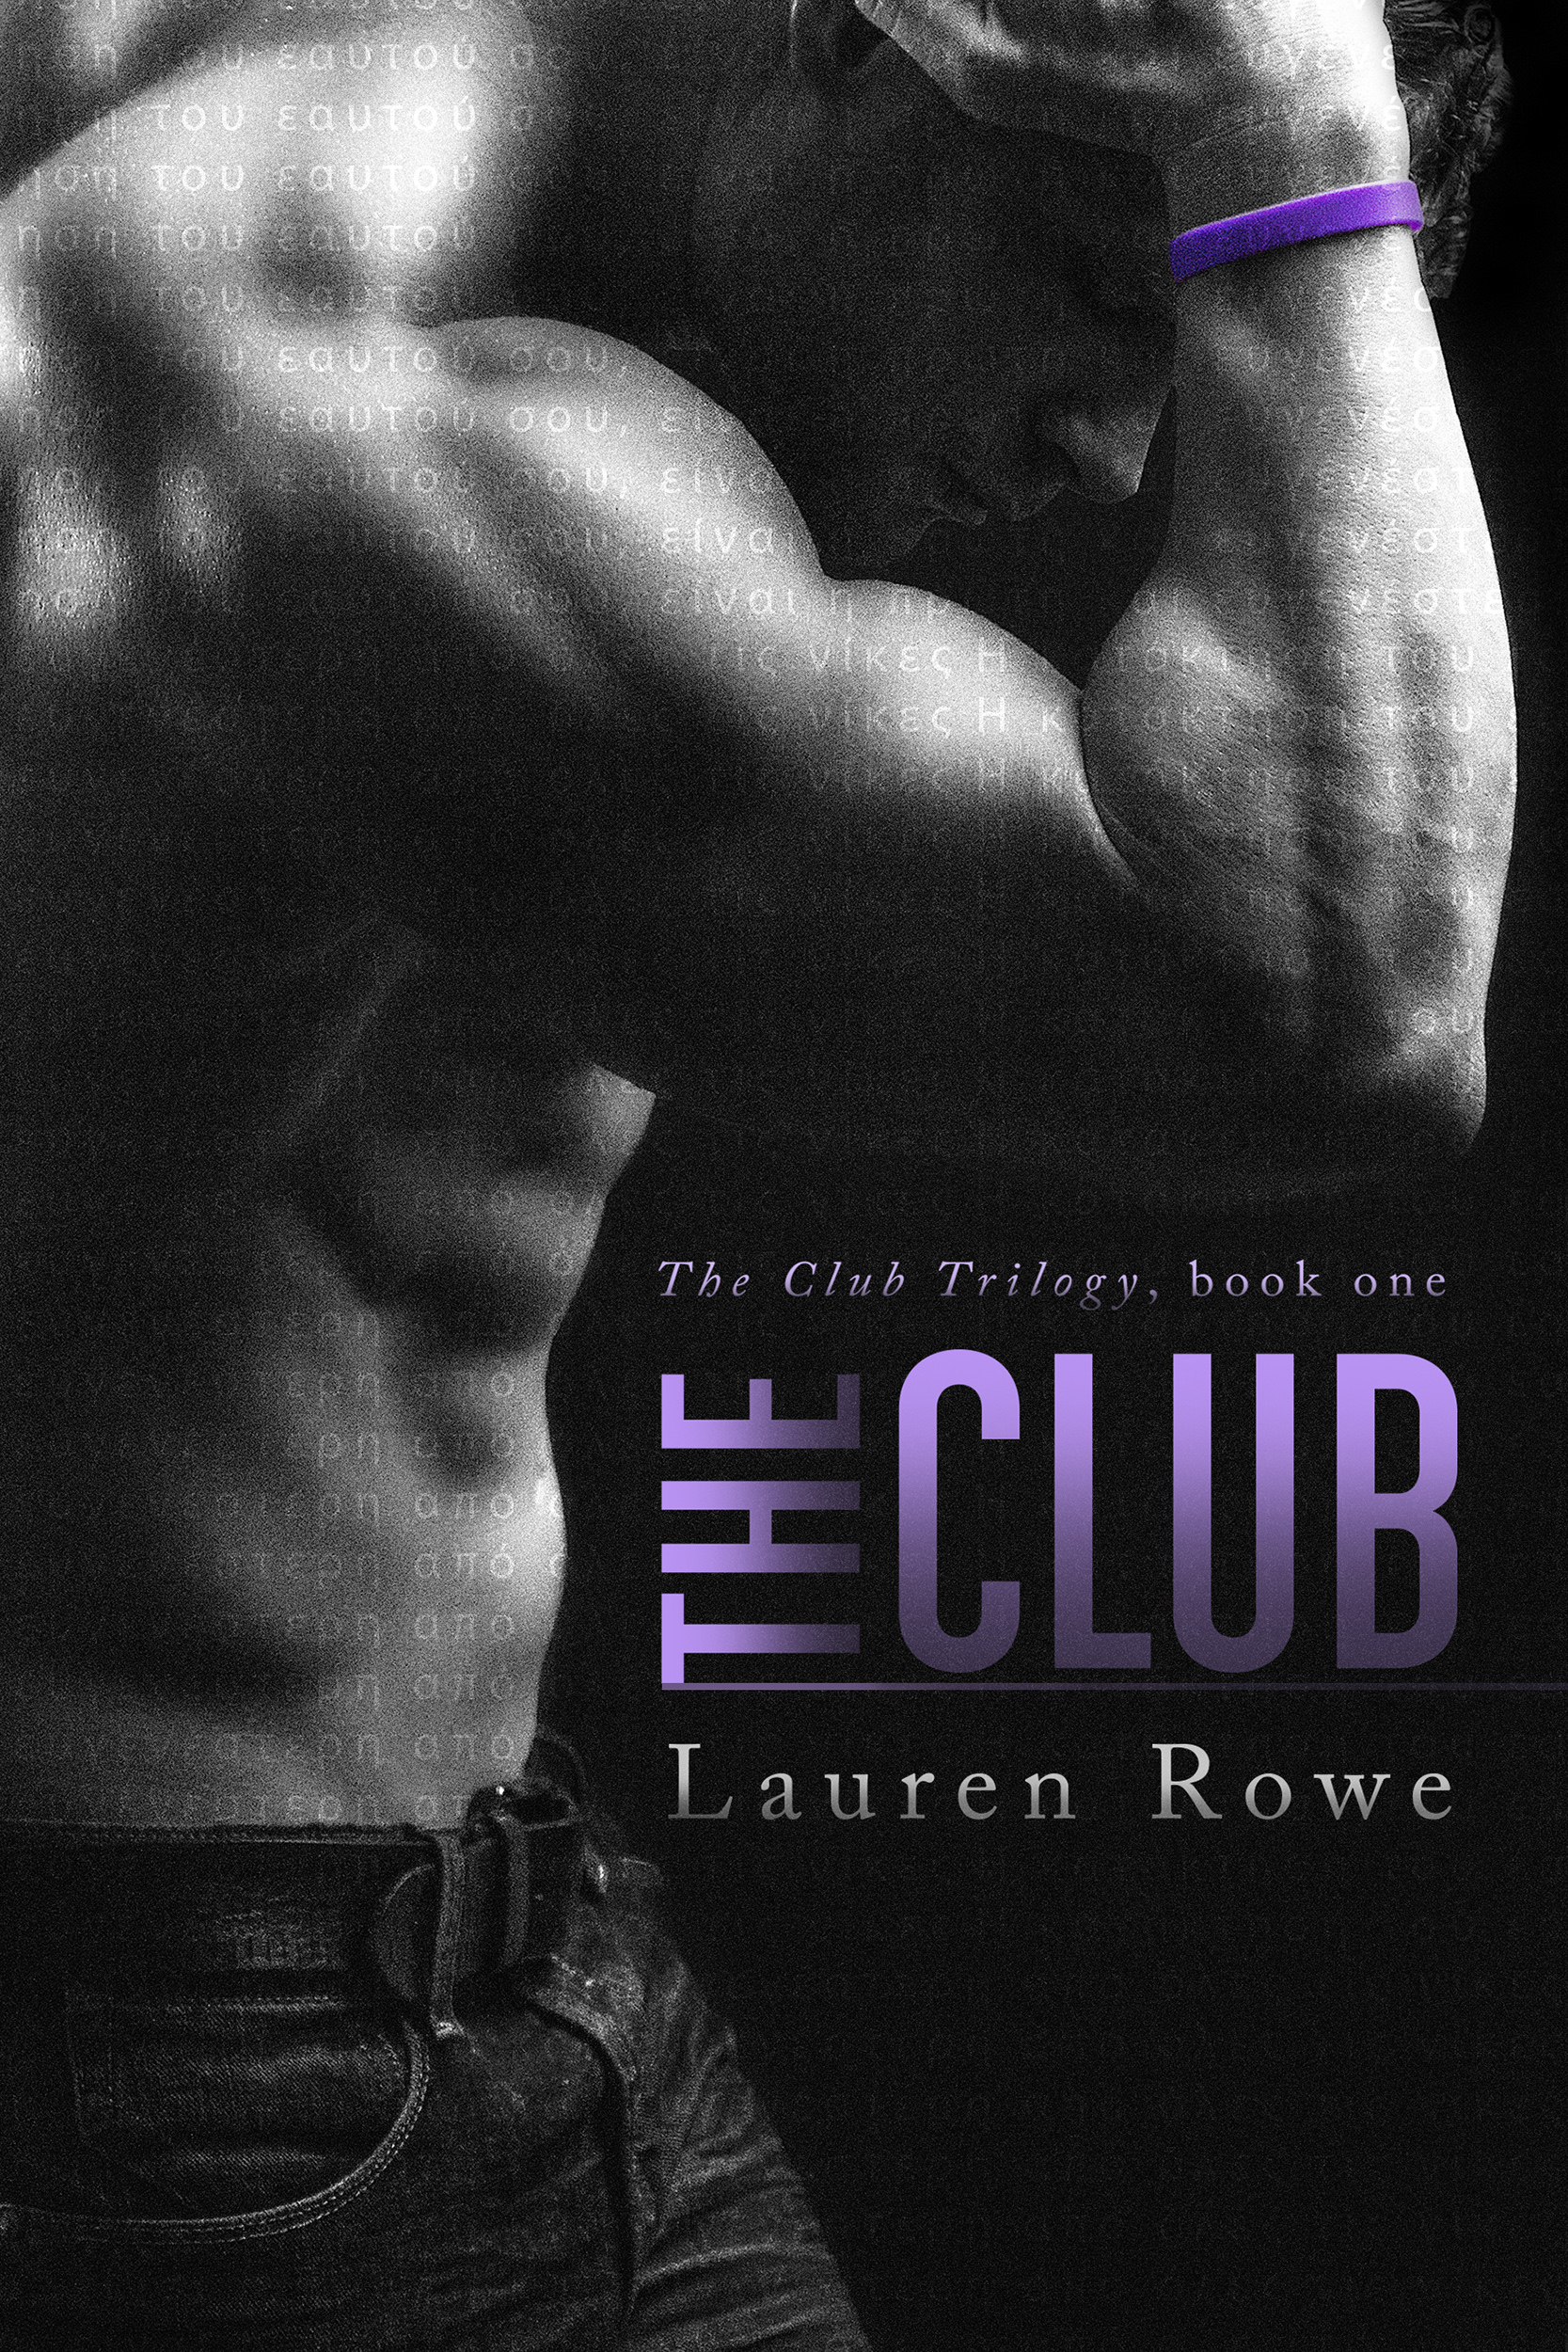 the club book review nytimes